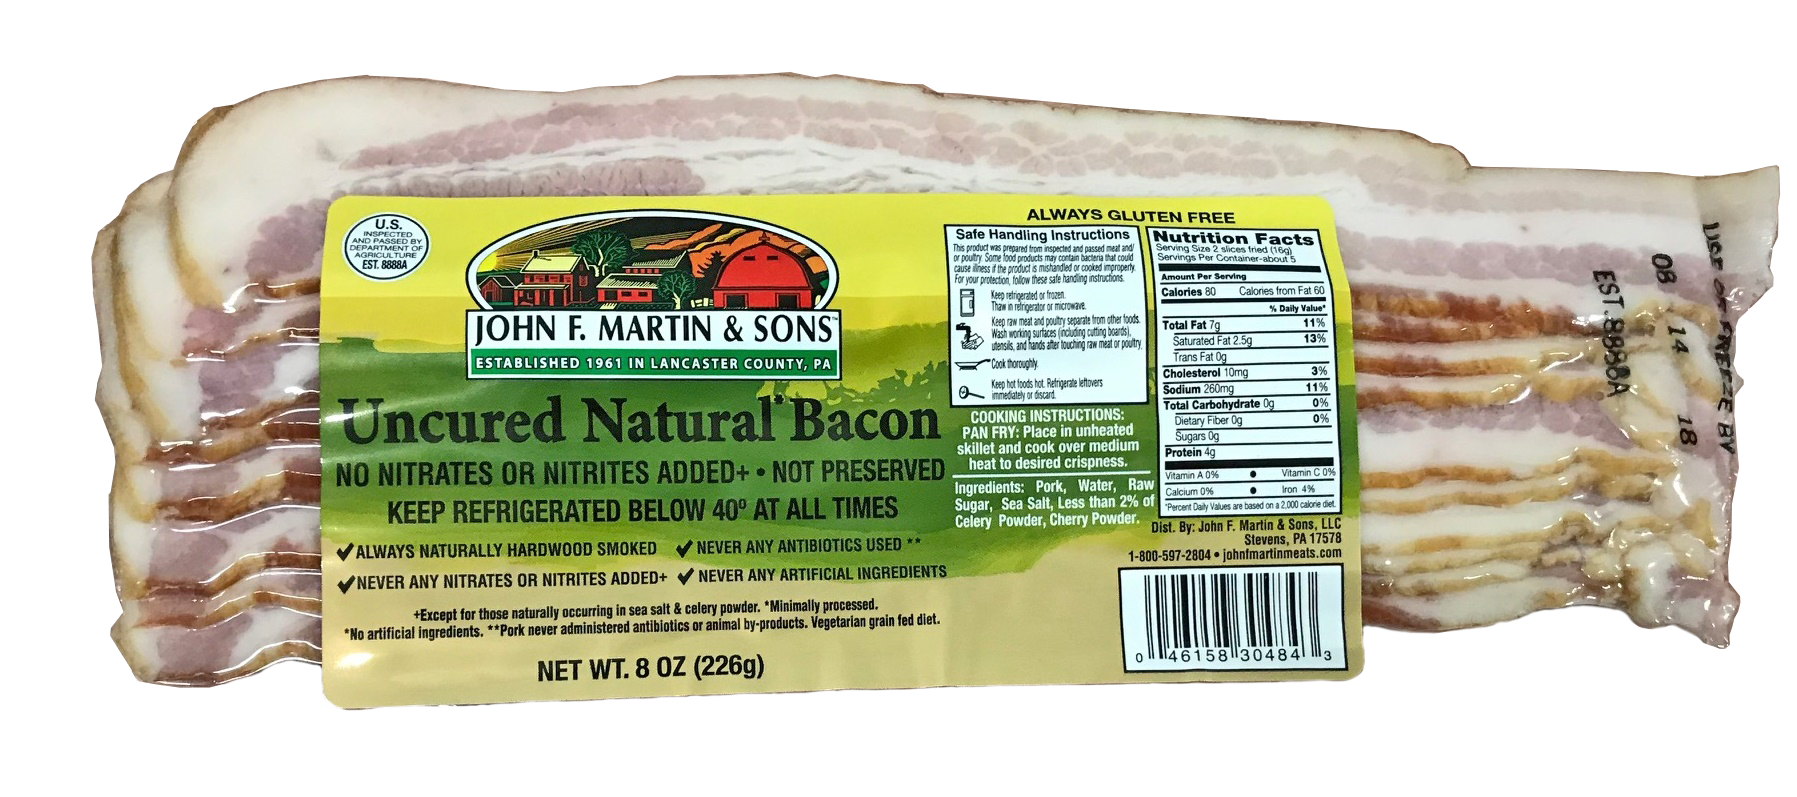 Uncured Natural Bacon